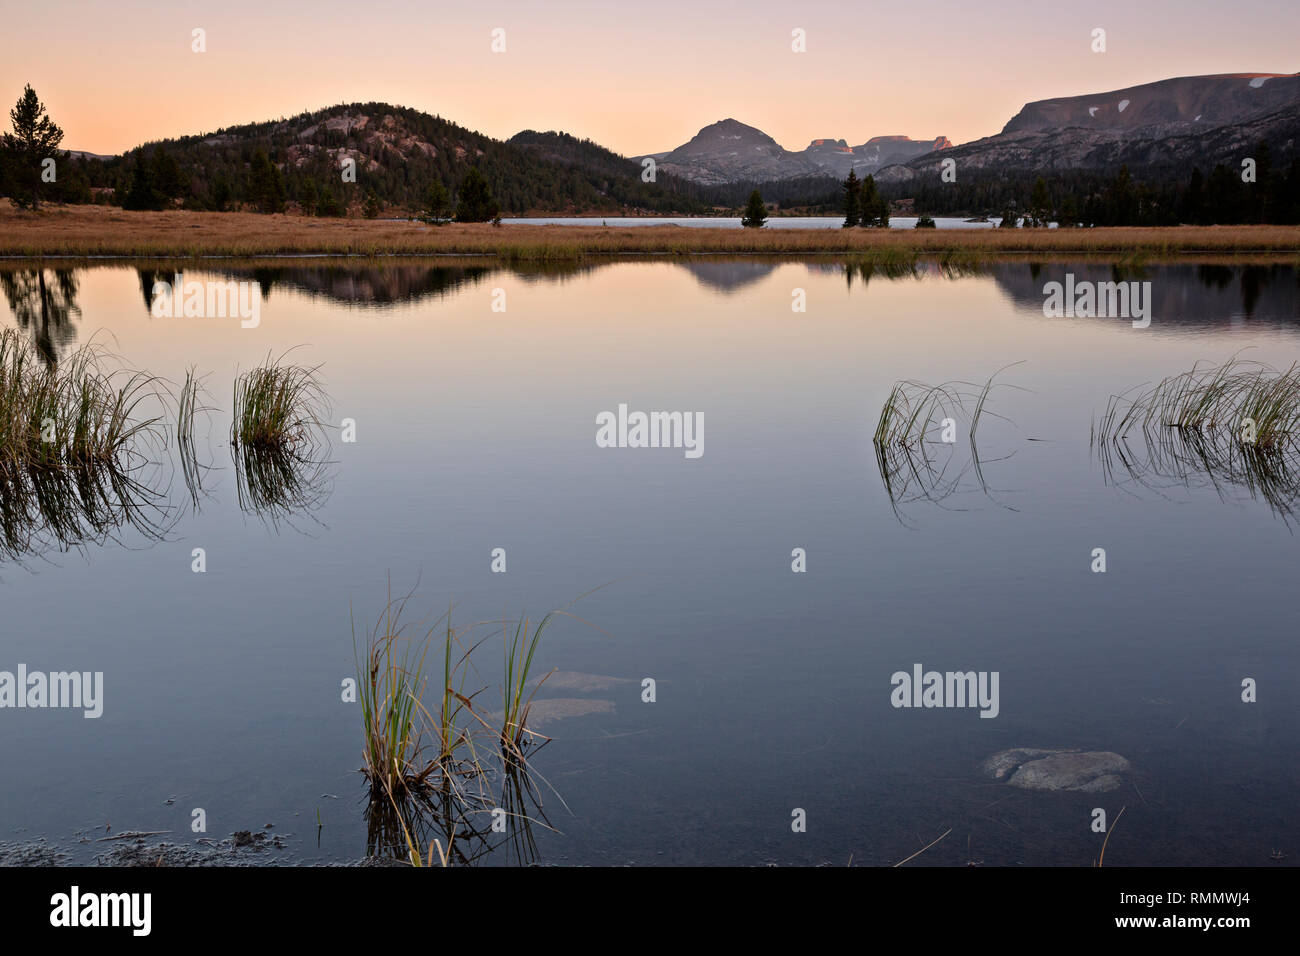 WY03748-00...WYOMING - Sunrise from a small pond along the shore of Island Lake in the Beartooth Mountans area of Shoshone National Forest. Stock Photo